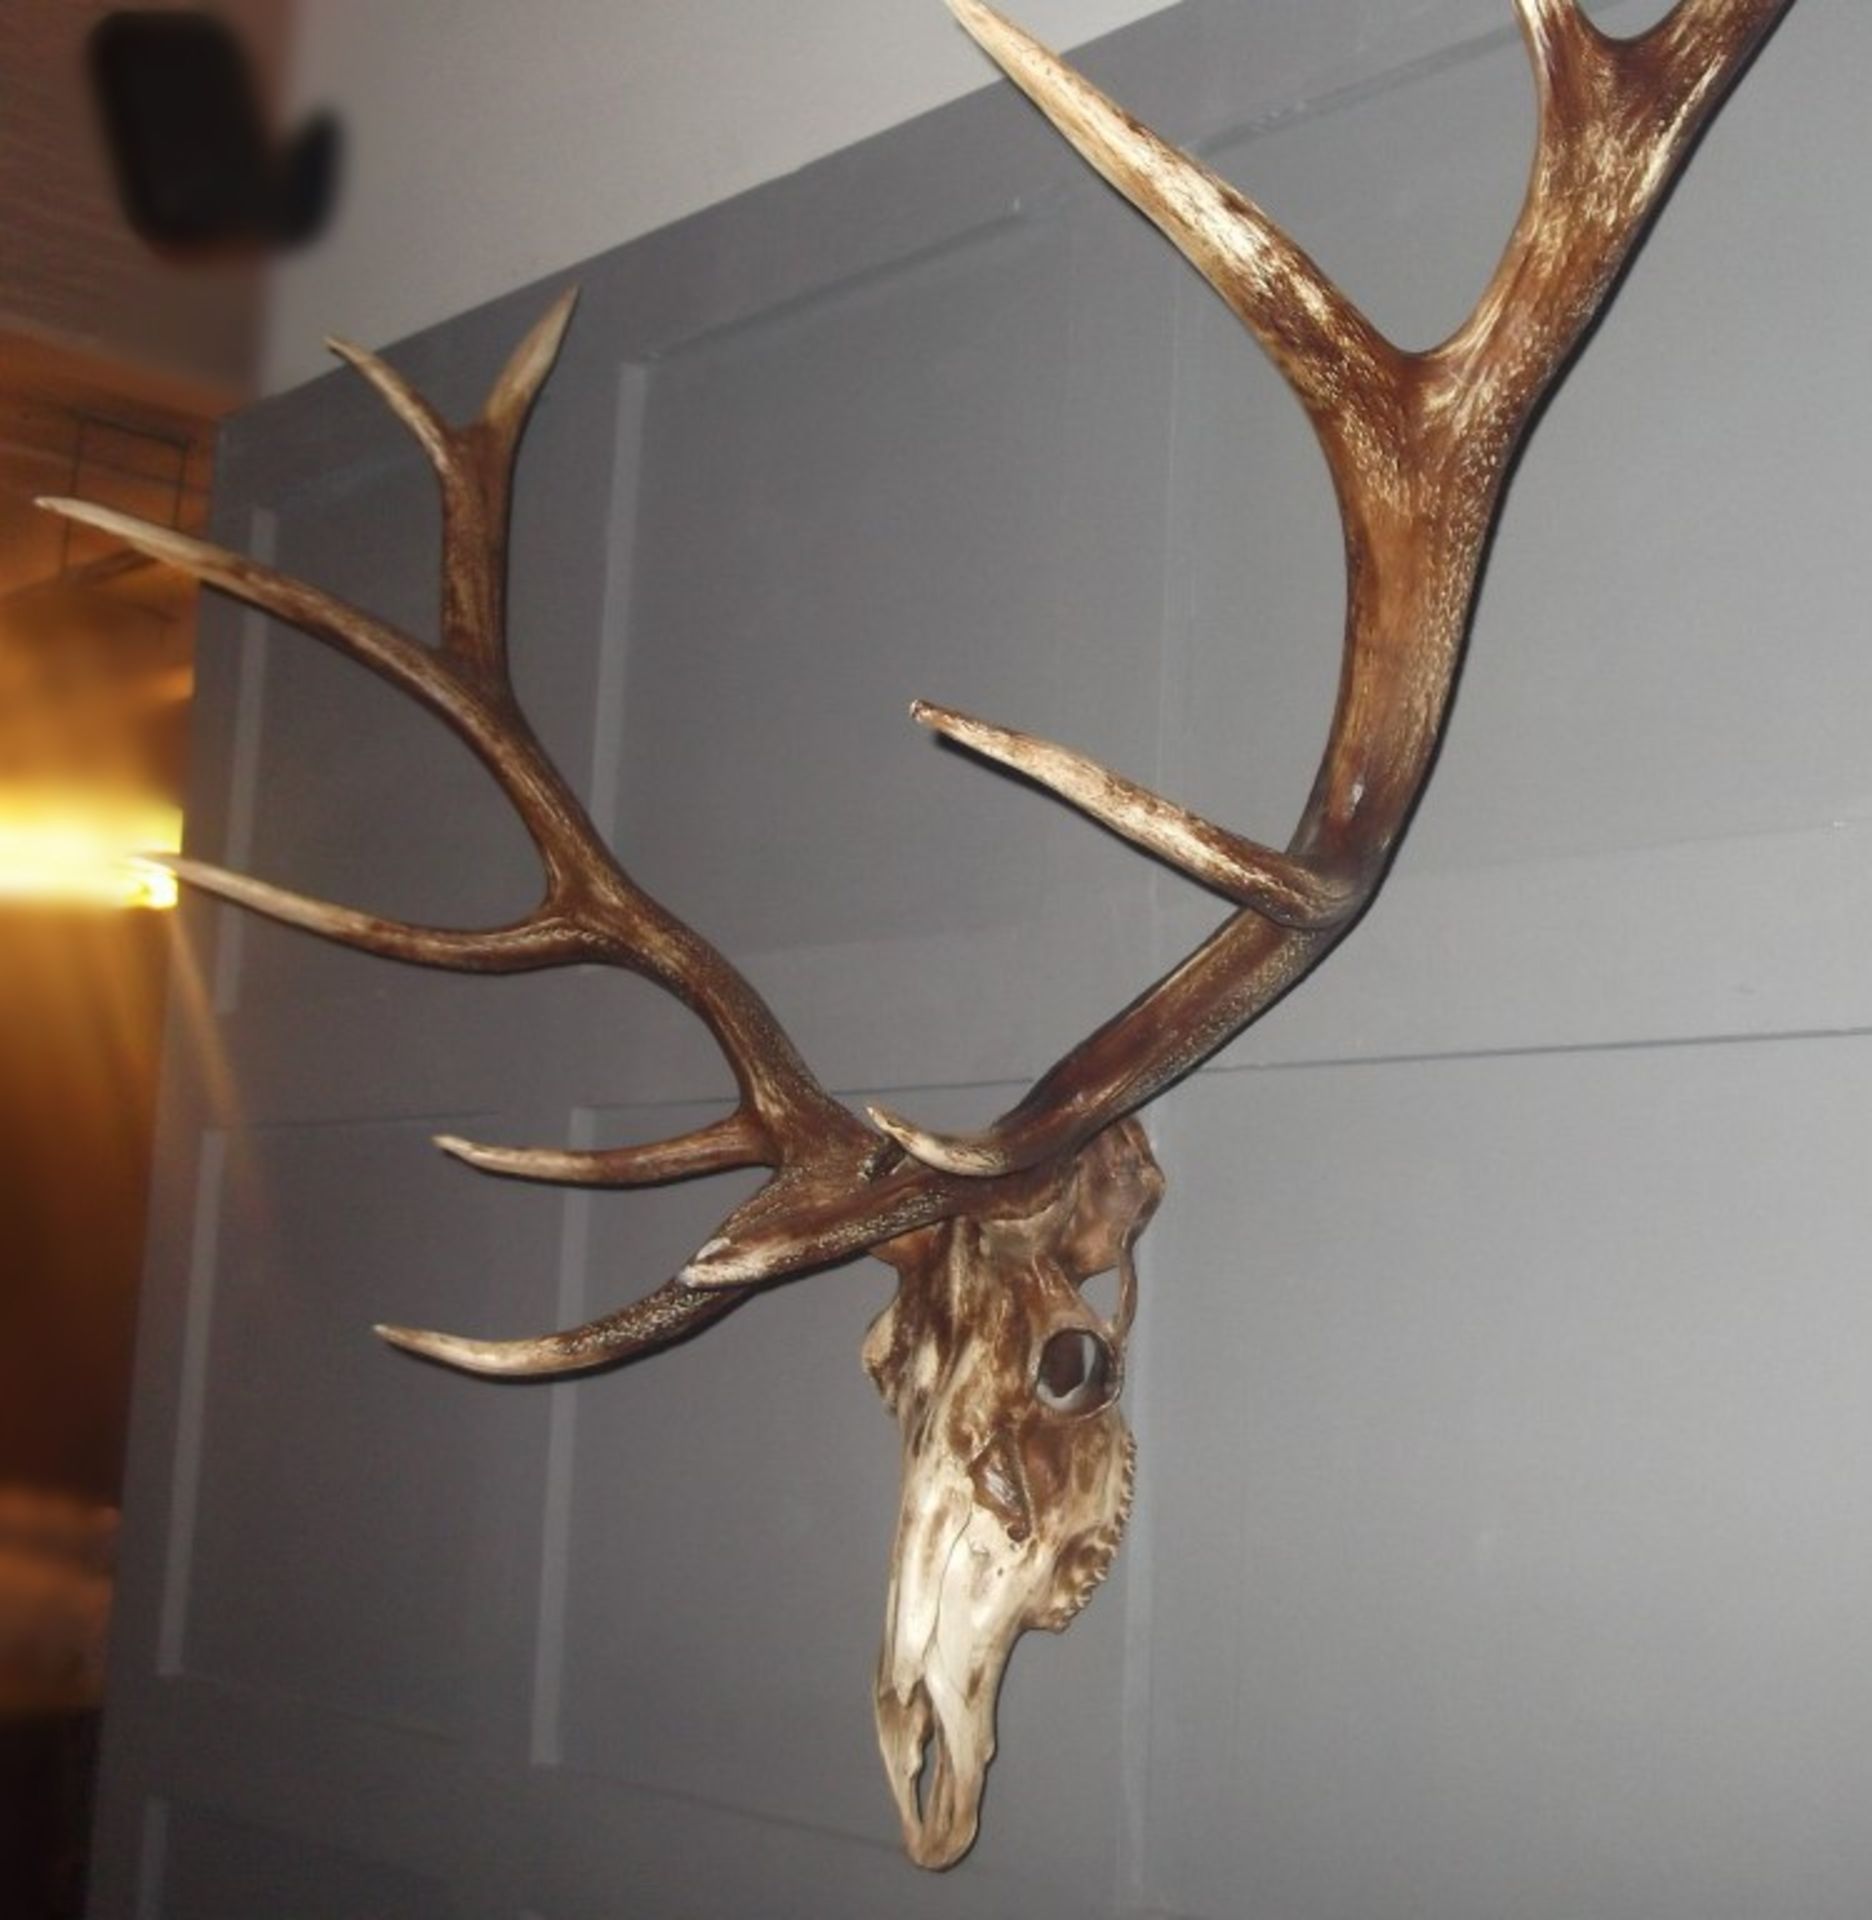 1 x Trophy Deer Skull Wall - Art Decoration - New / Unused Stock - Very Realistic Faux - Image 2 of 4